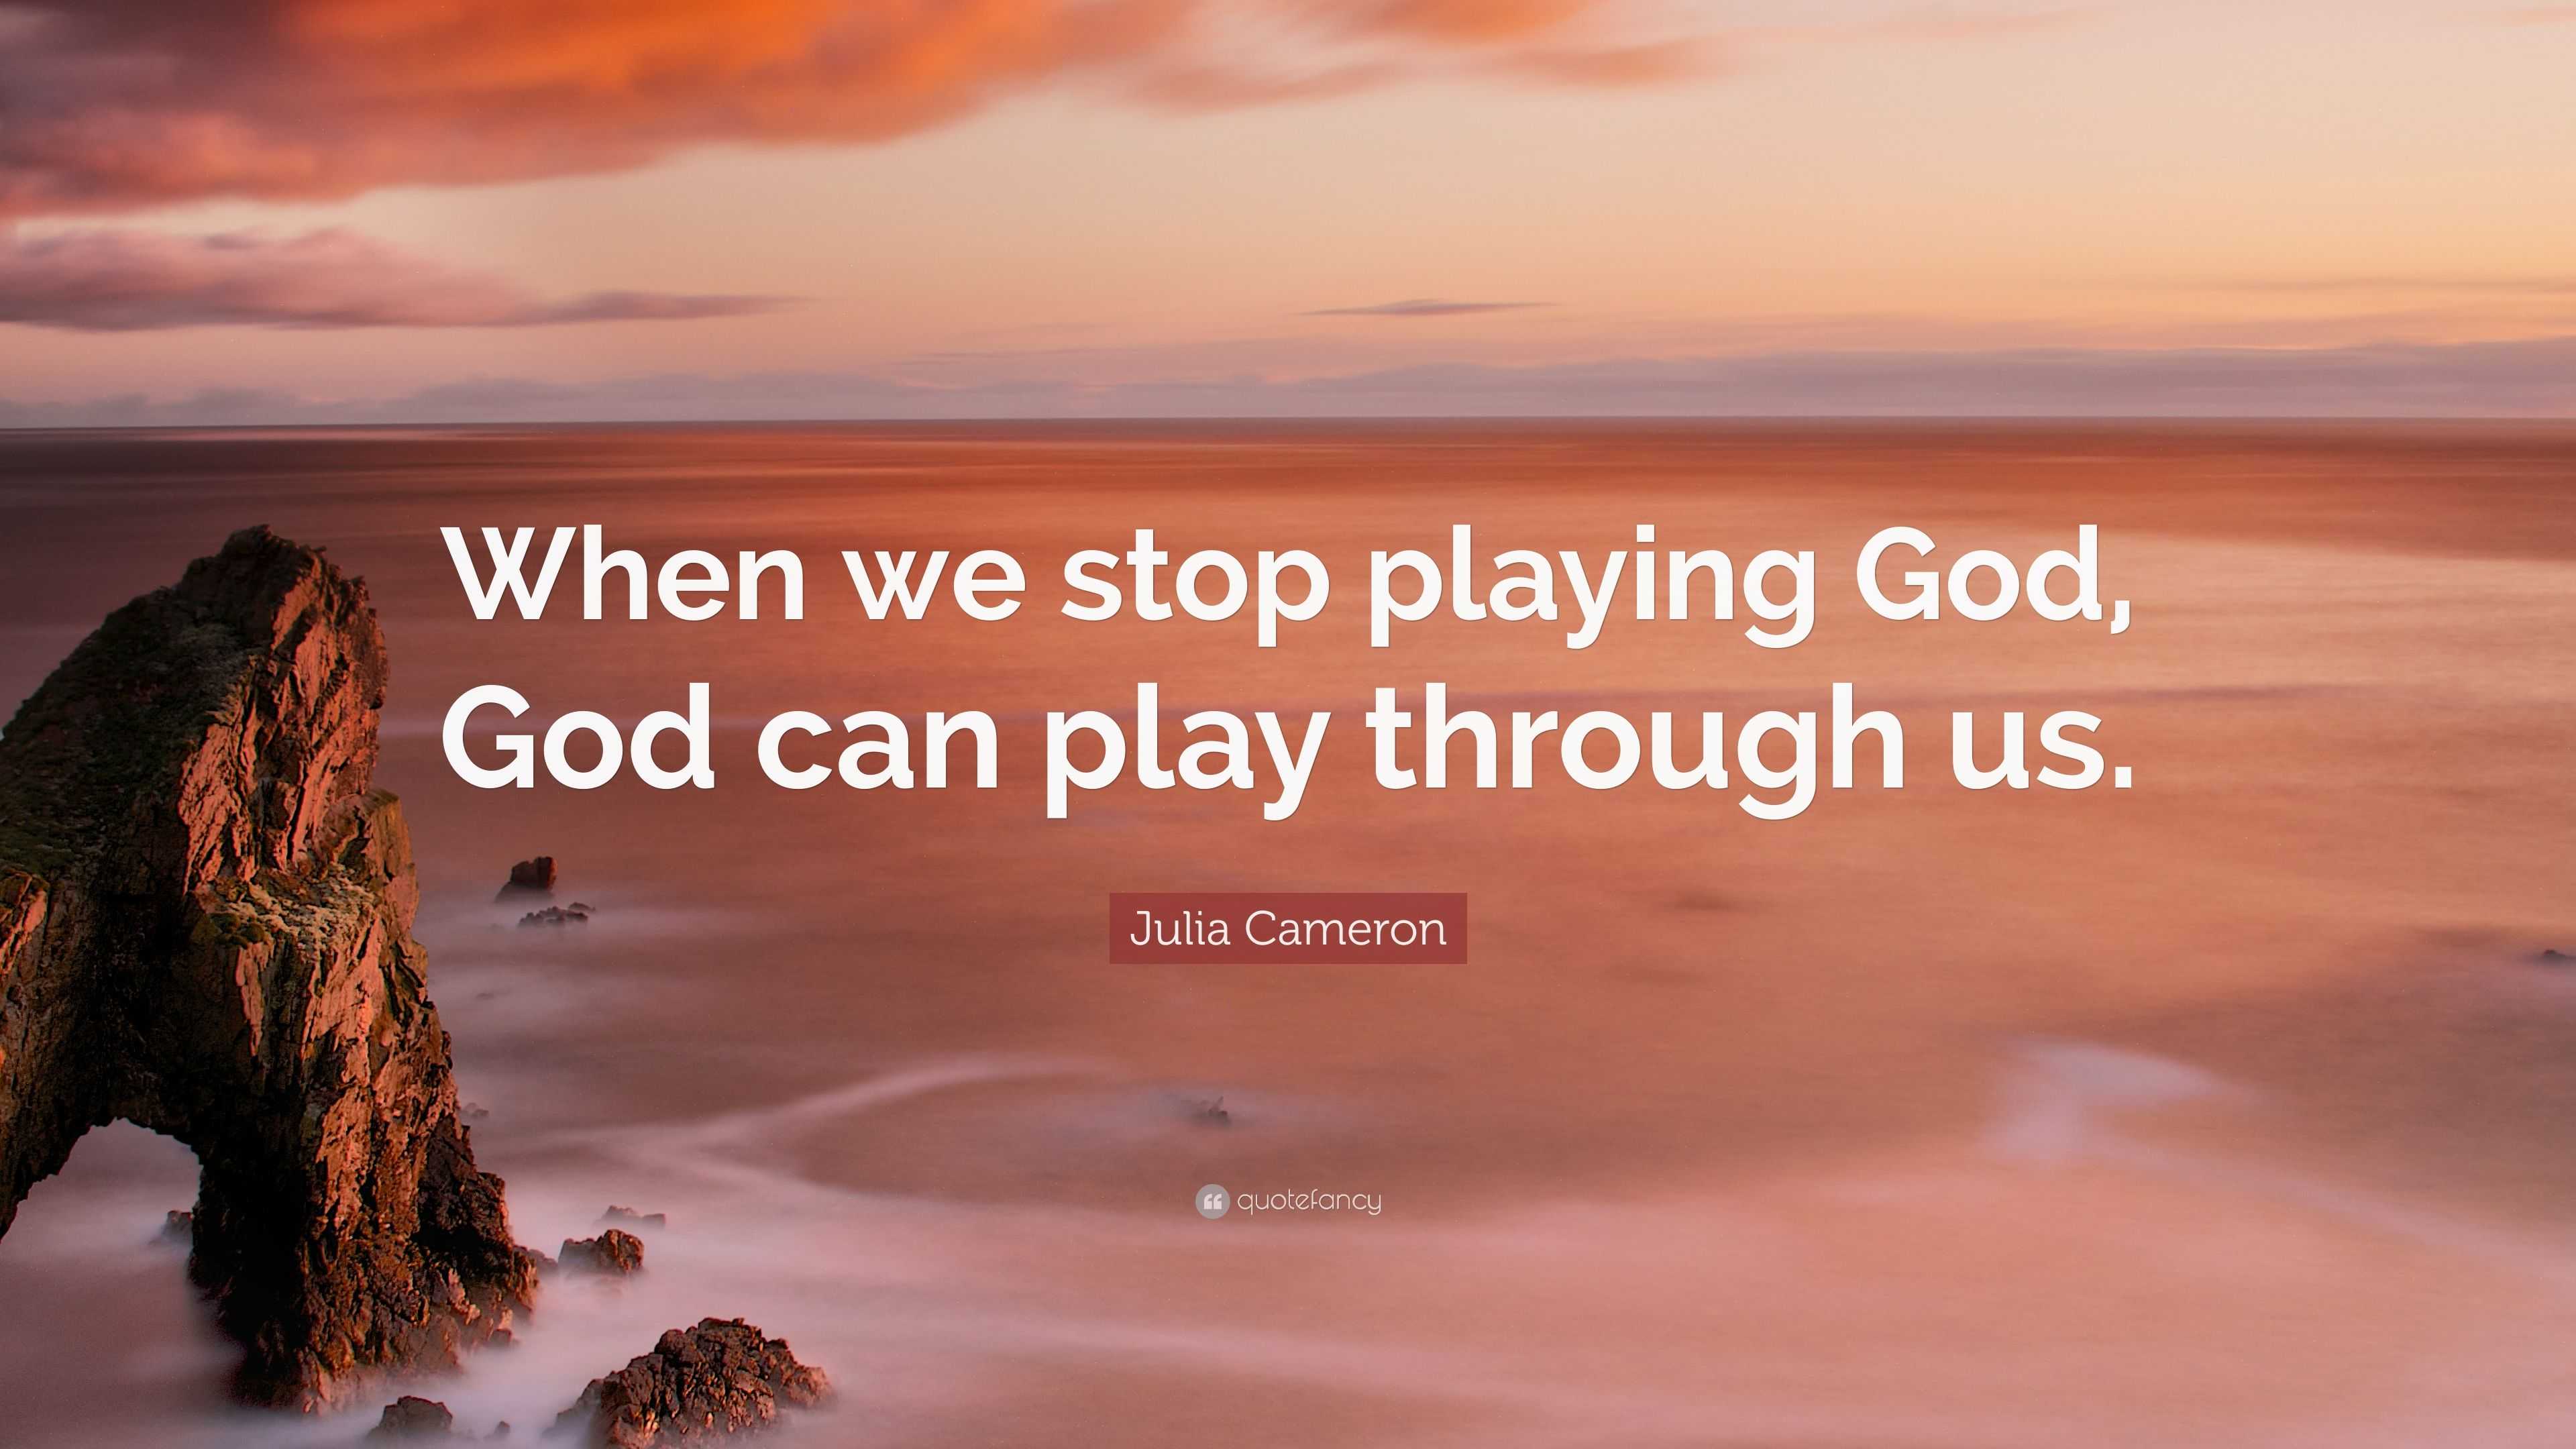 Julia Cameron quote: When we stop playing God, God can play through us.